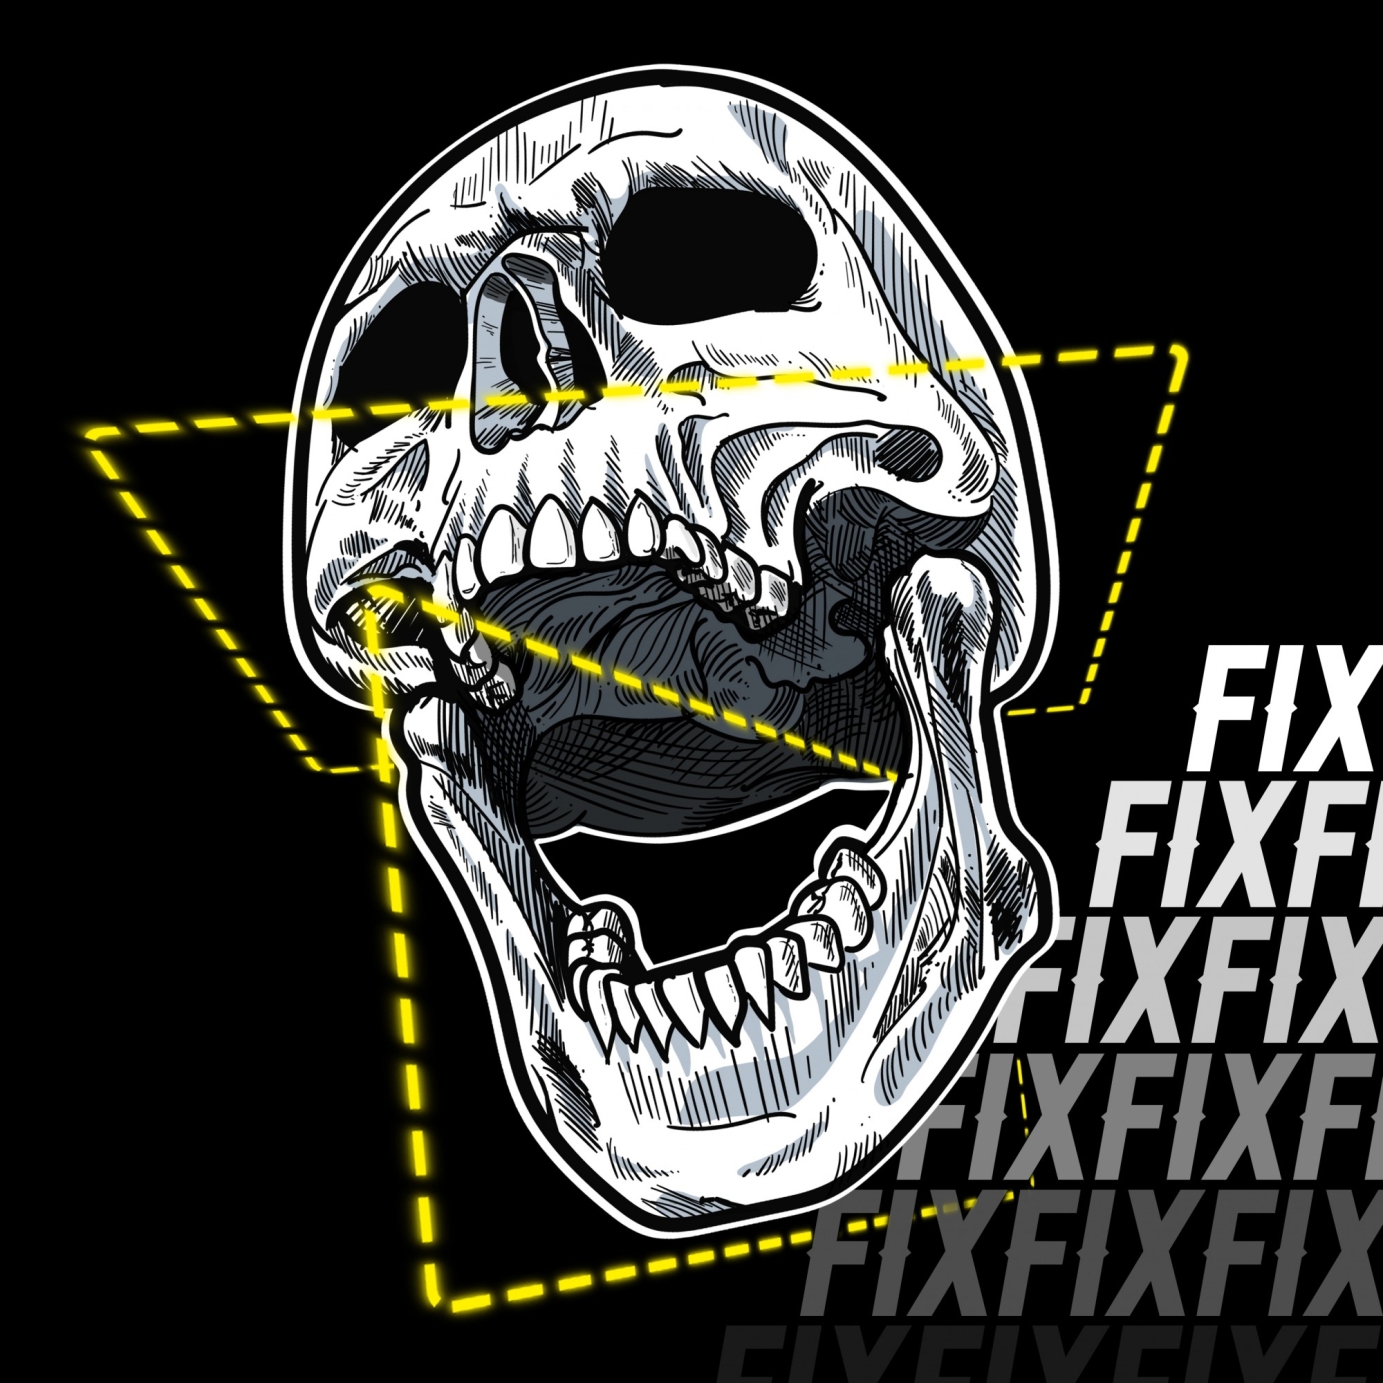 FIX - Tour support Artwork - Poster - merchandise designs and mockups with brand identity.